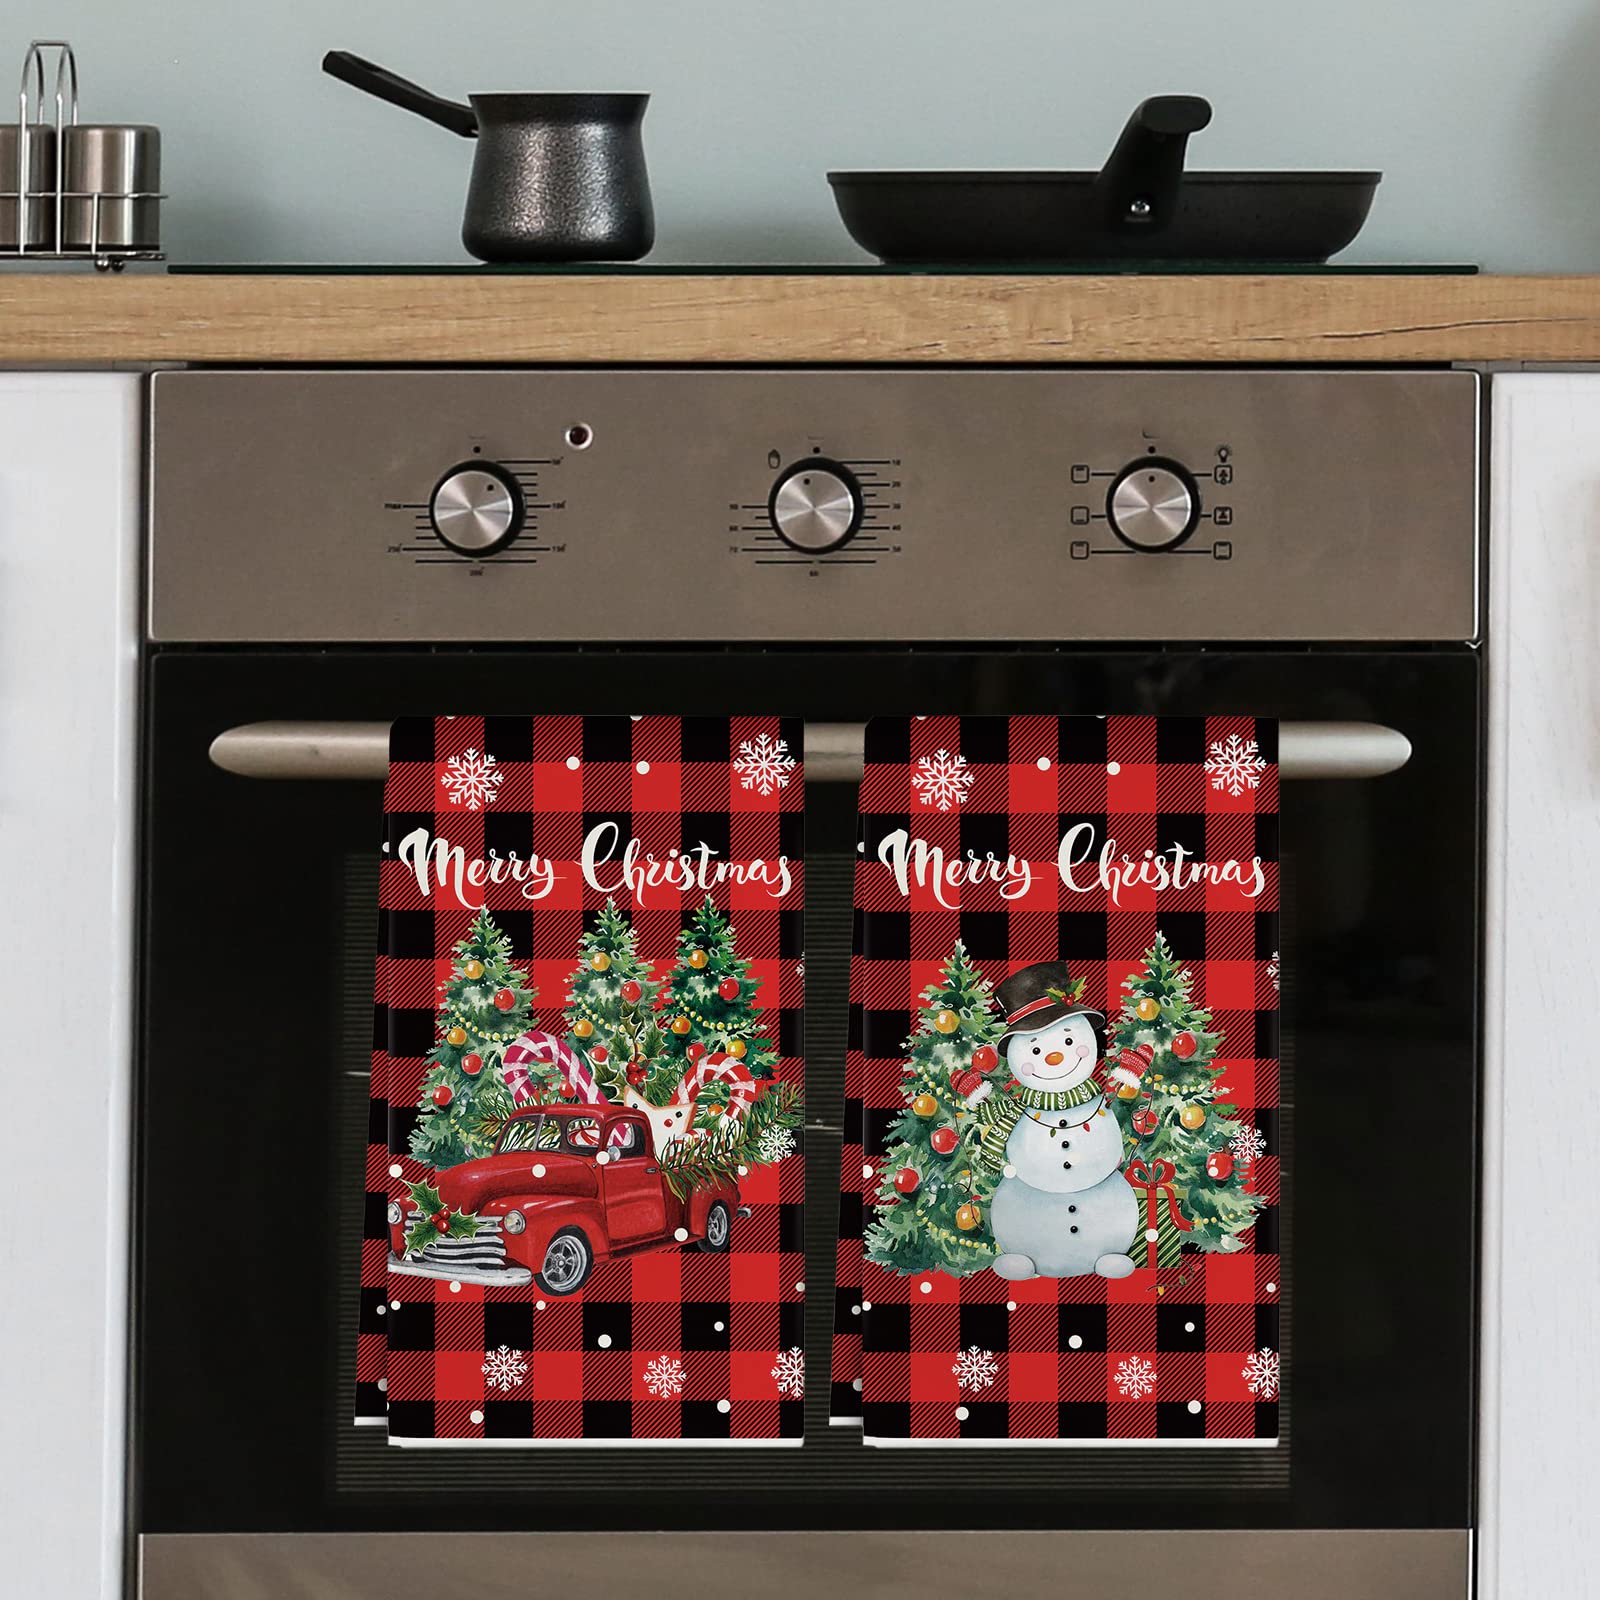 AnyDesign Merry Christmas Kitchen Towels Red Black Buffalo Plaid Dish Towels 28 x 18 Snowman Truck Xmas Tree Holiday Hand Drying Towels for Christmas Home Kitchen Decor Housewarming Gifts, Set of 2